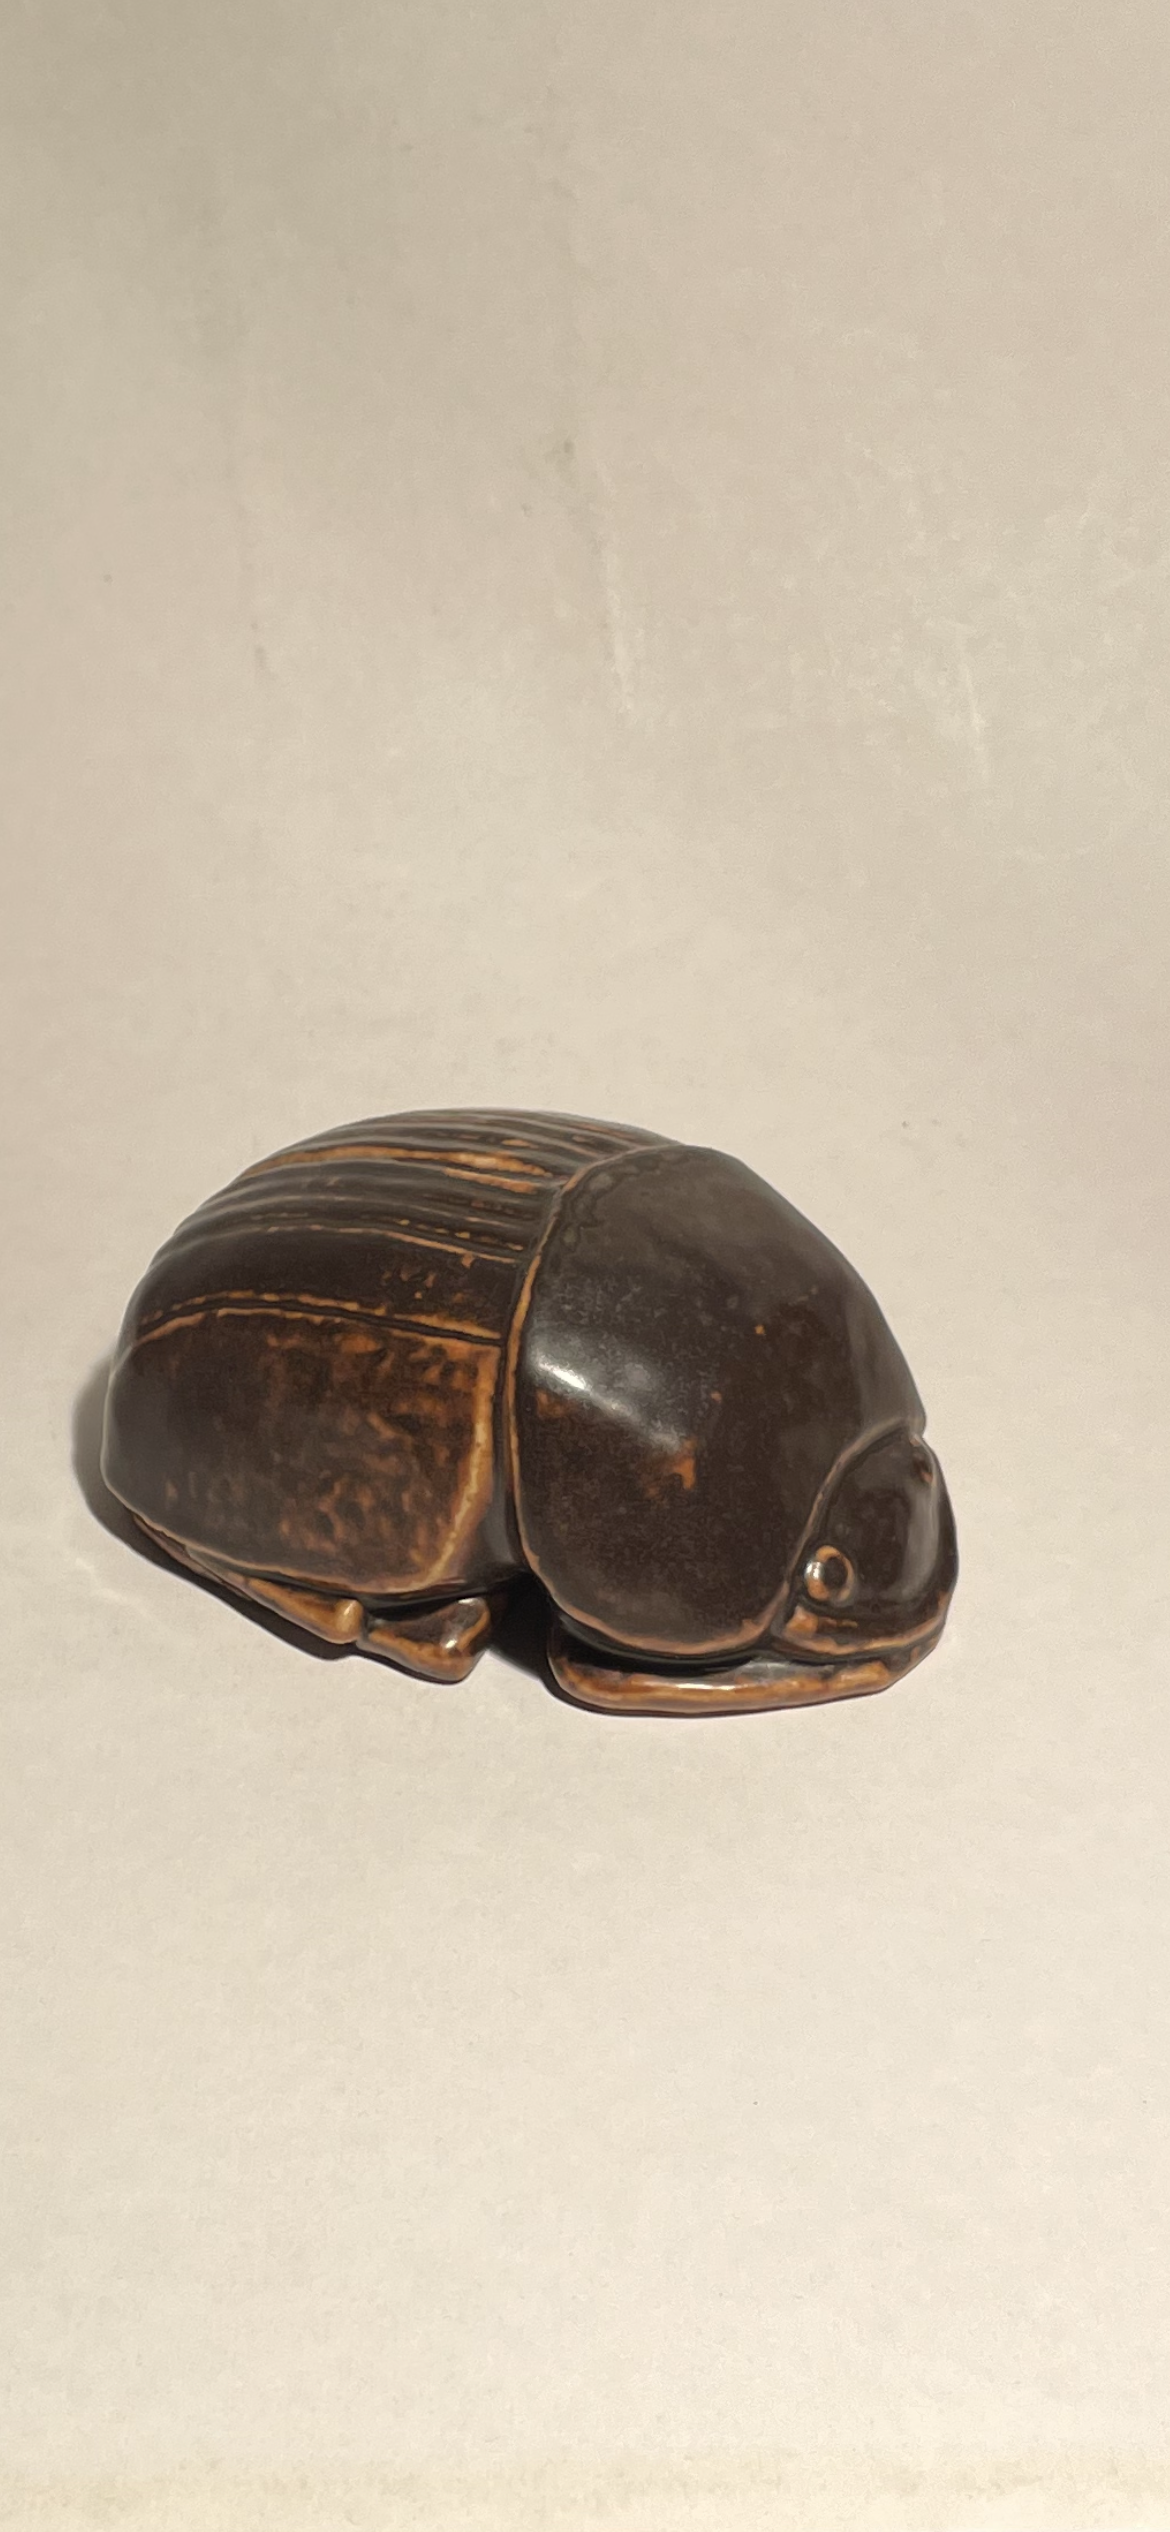 Rare Egyptian Scarab in stoneware from Bing and Grøndahl - no. 01320